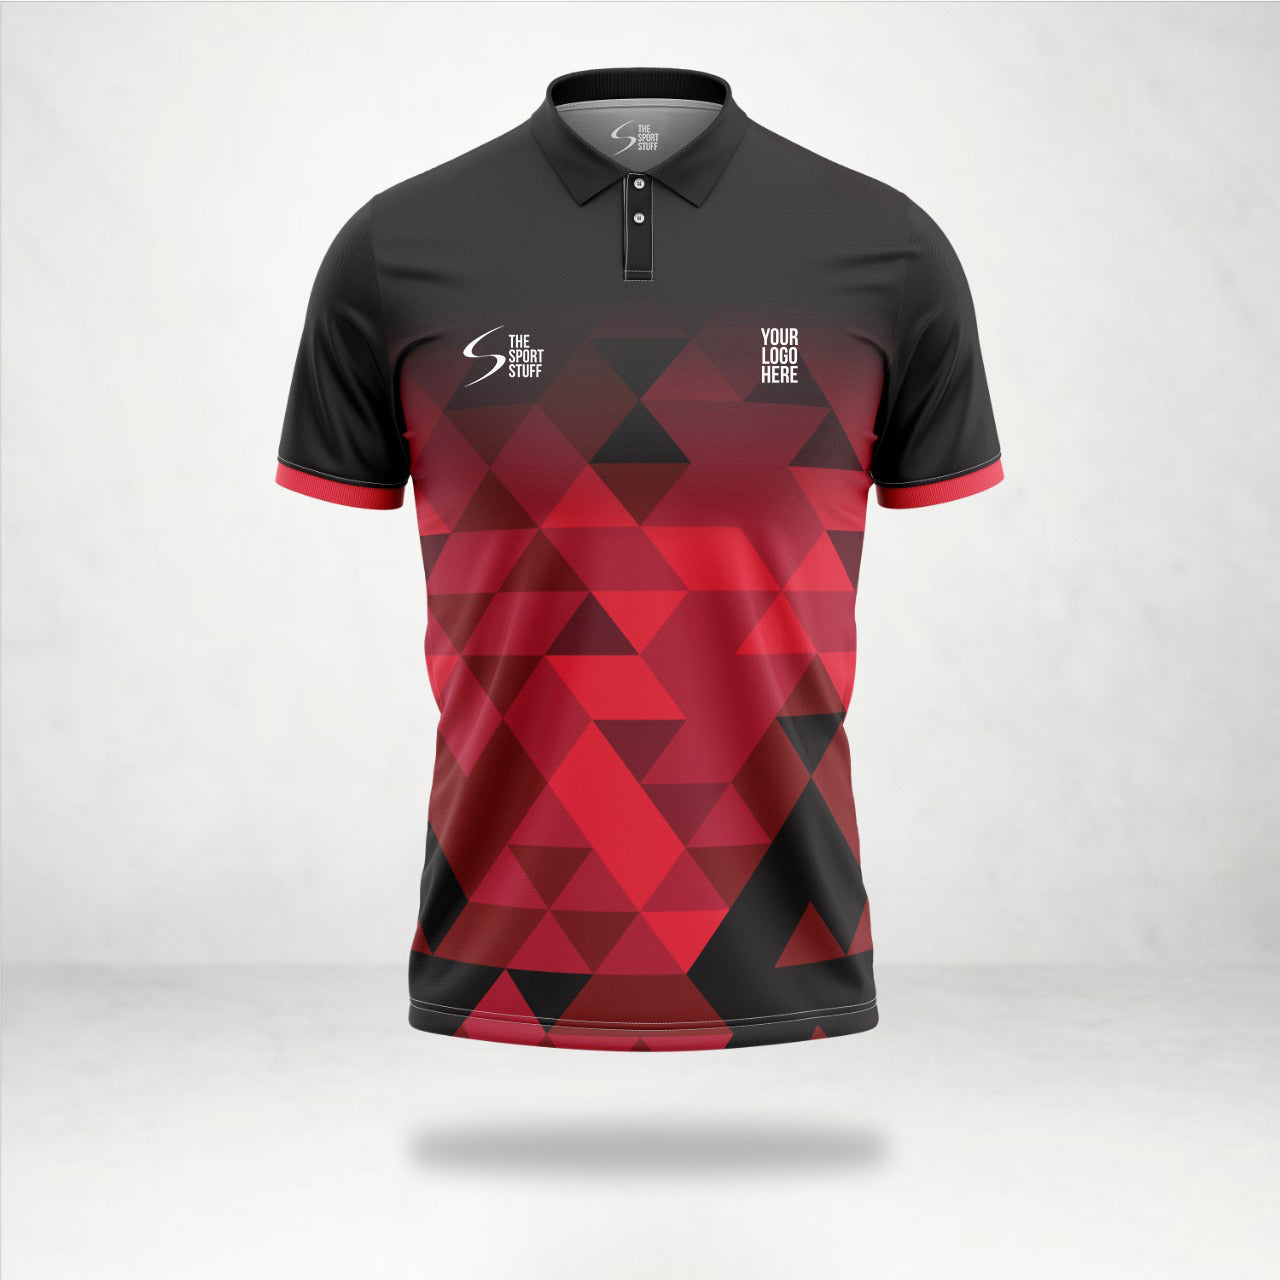 BLACK RED CRICKET JERSEY in 2023  Cricket t shirt design, Polo